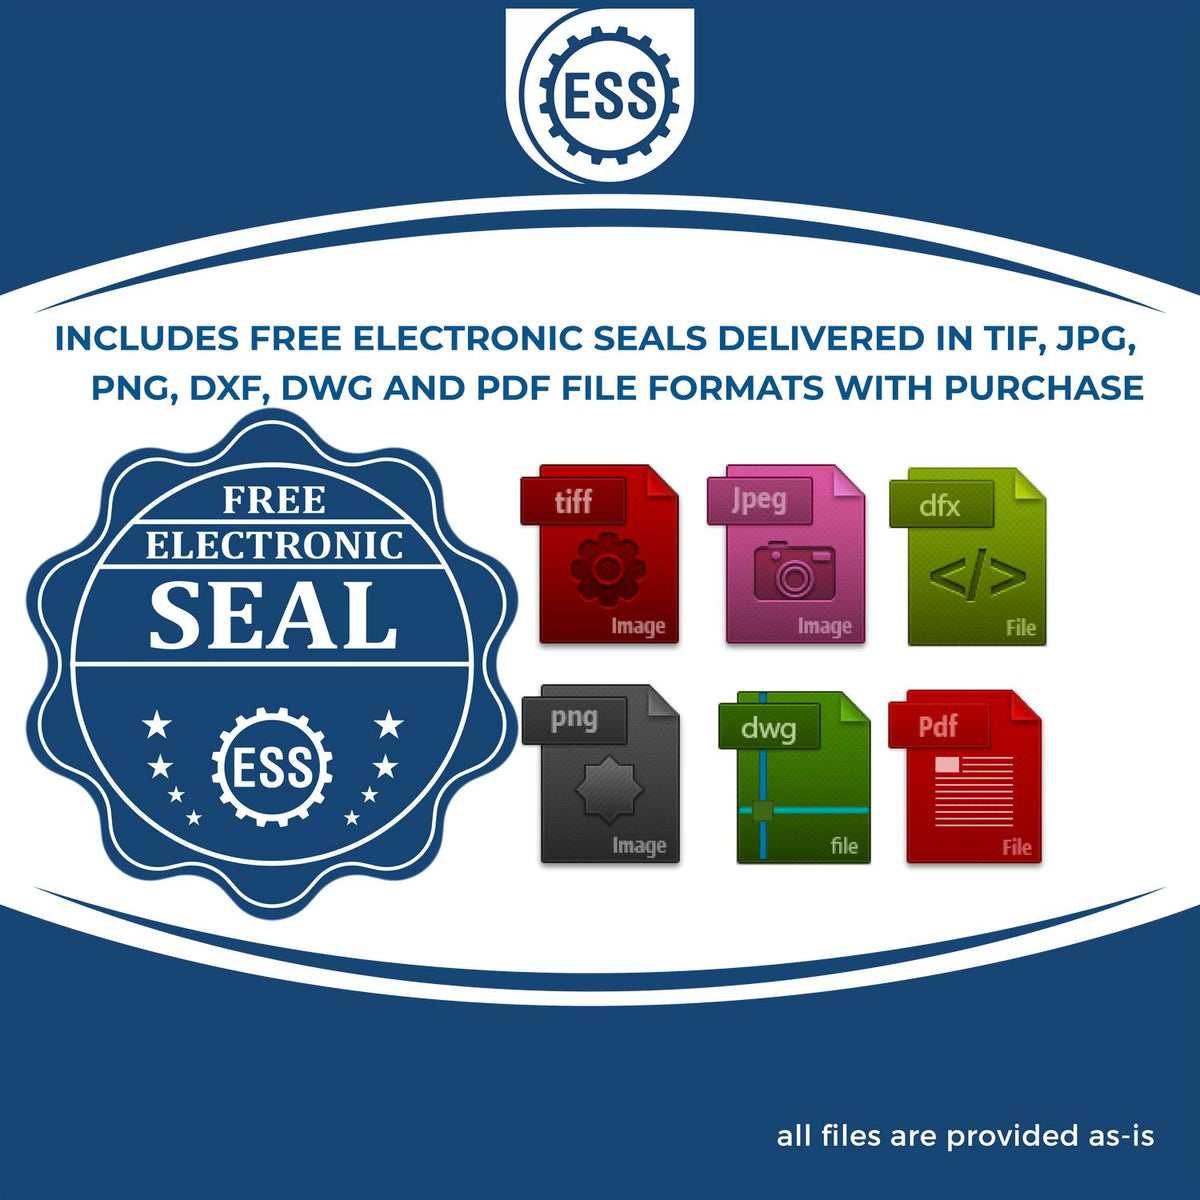 An infographic for the free electronic seal for the Handheld Missouri Professional Engineer Embosser illustrating the different file type icons such as DXF, DWG, TIF, JPG and PNG.